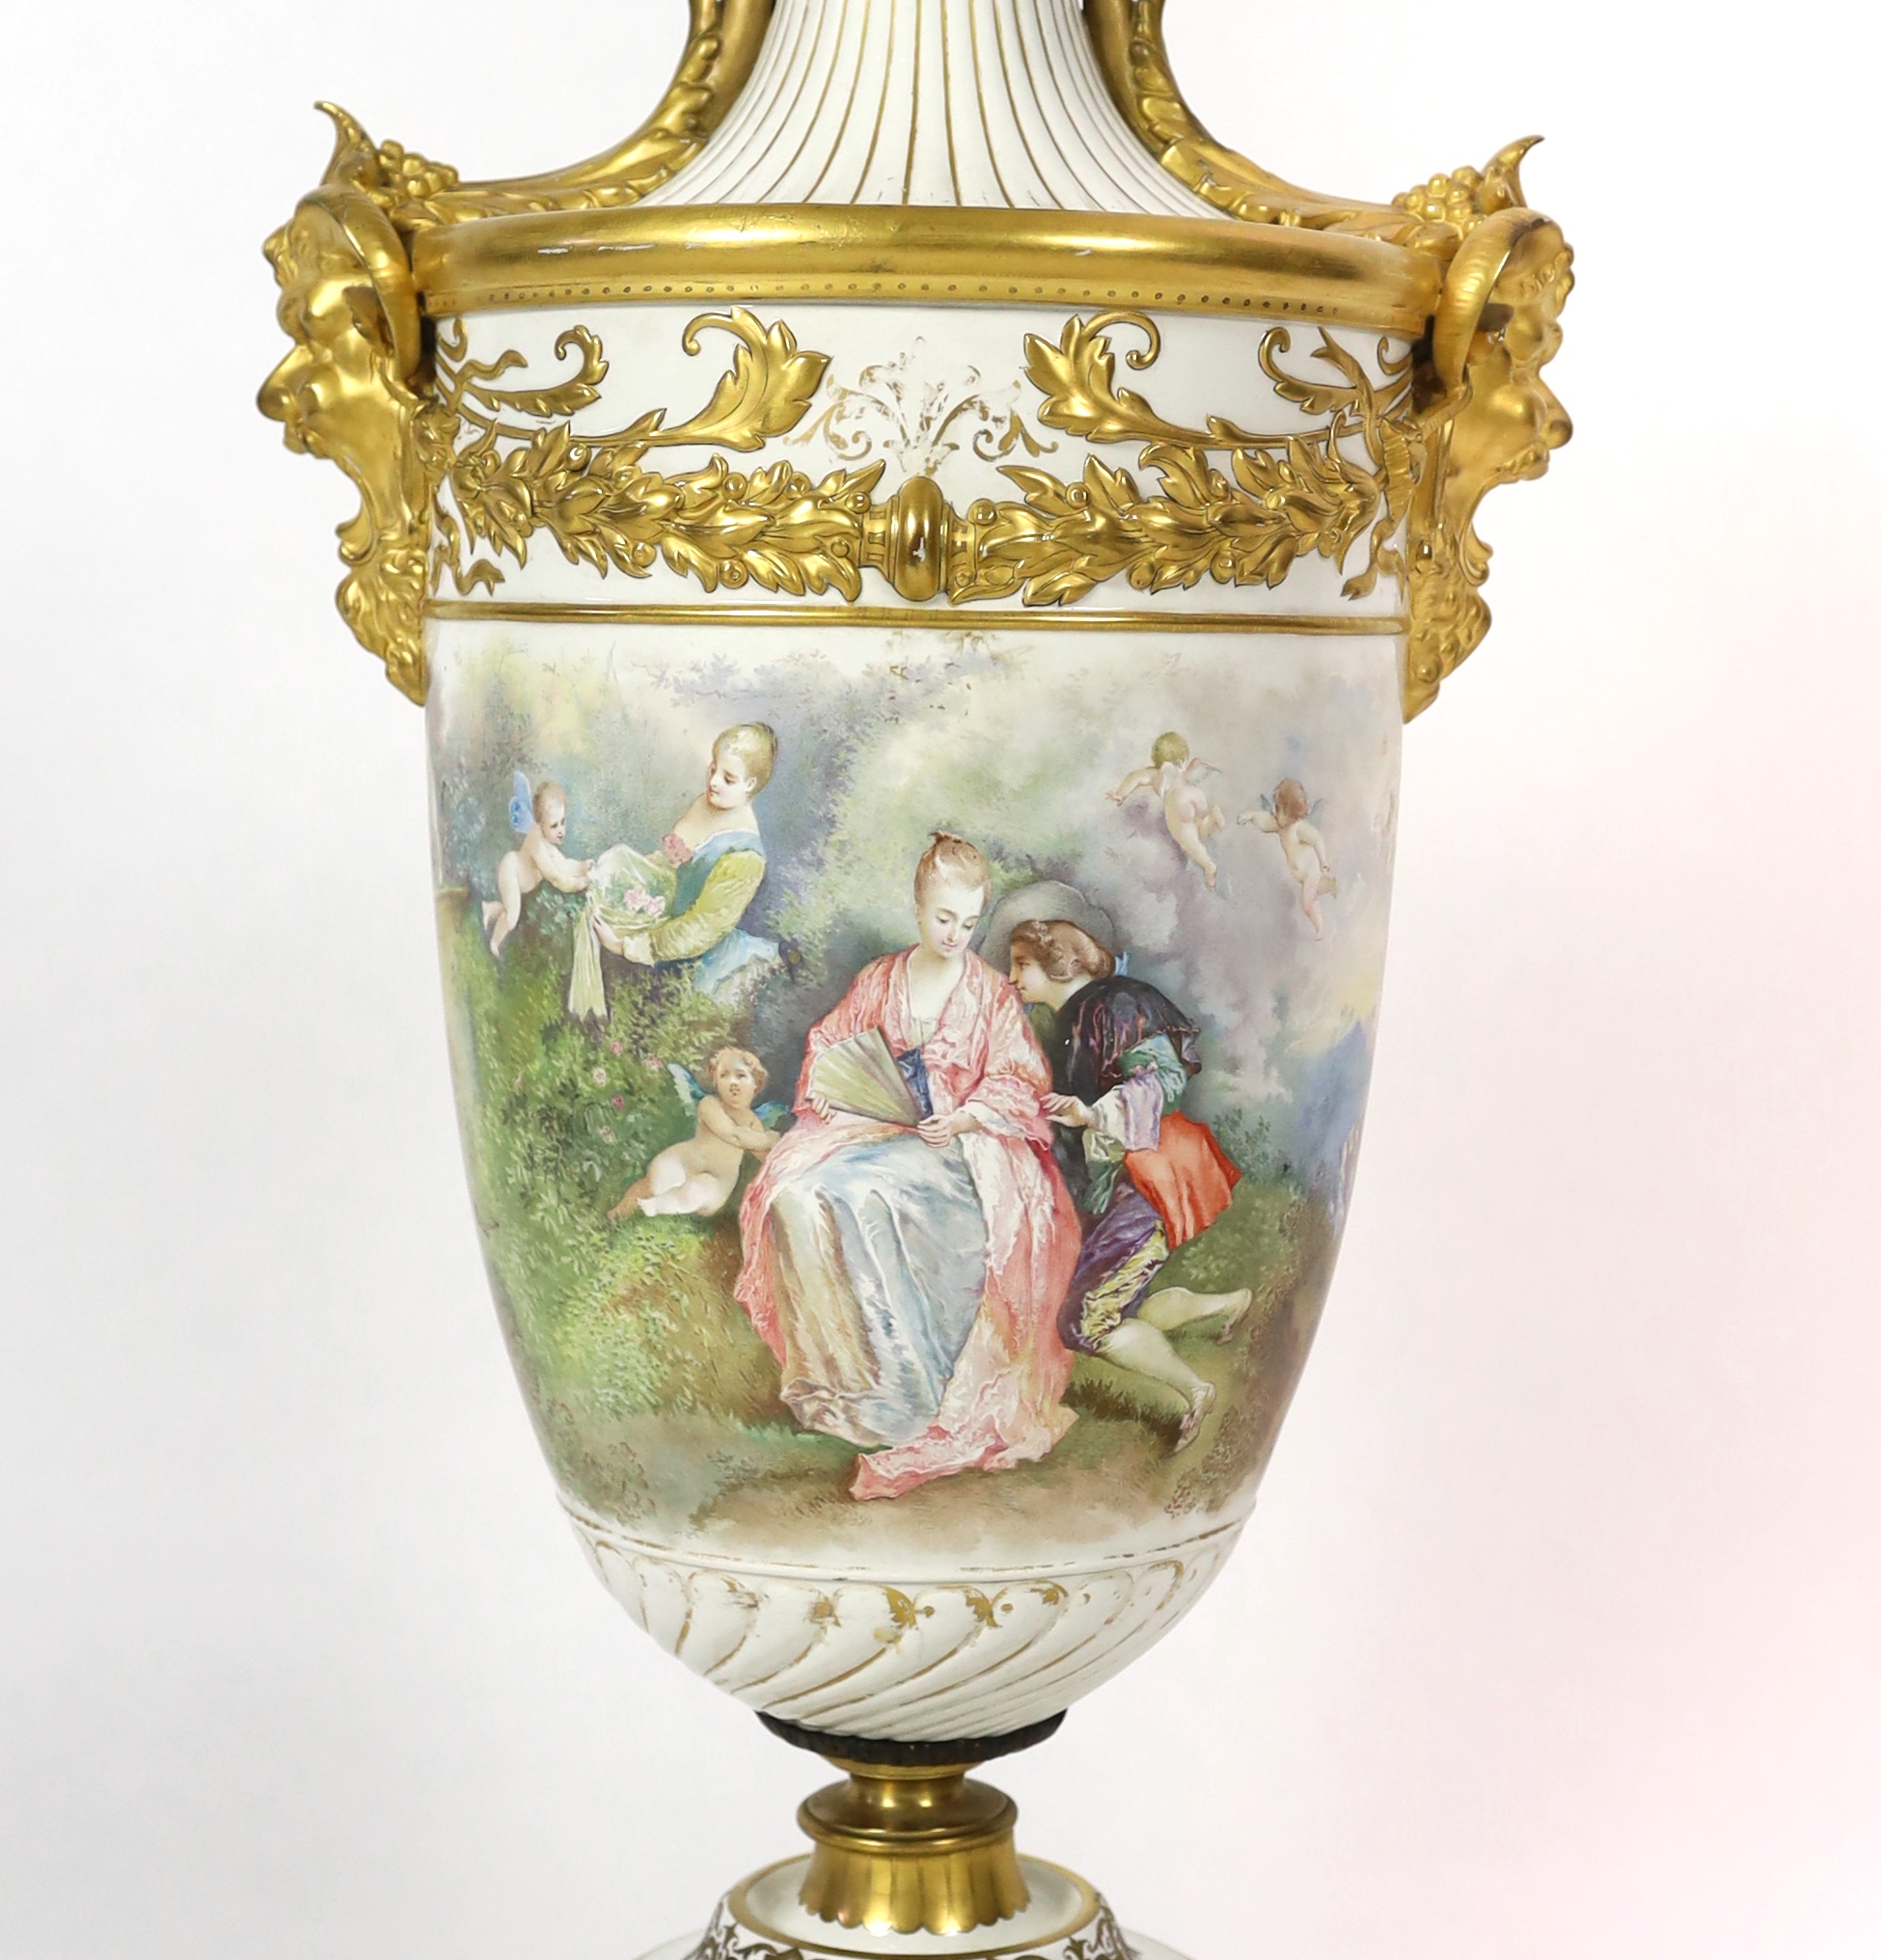 A large French porcelain and ormolu mounted vase, late 19th century, painted with courting couples - Image 4 of 6